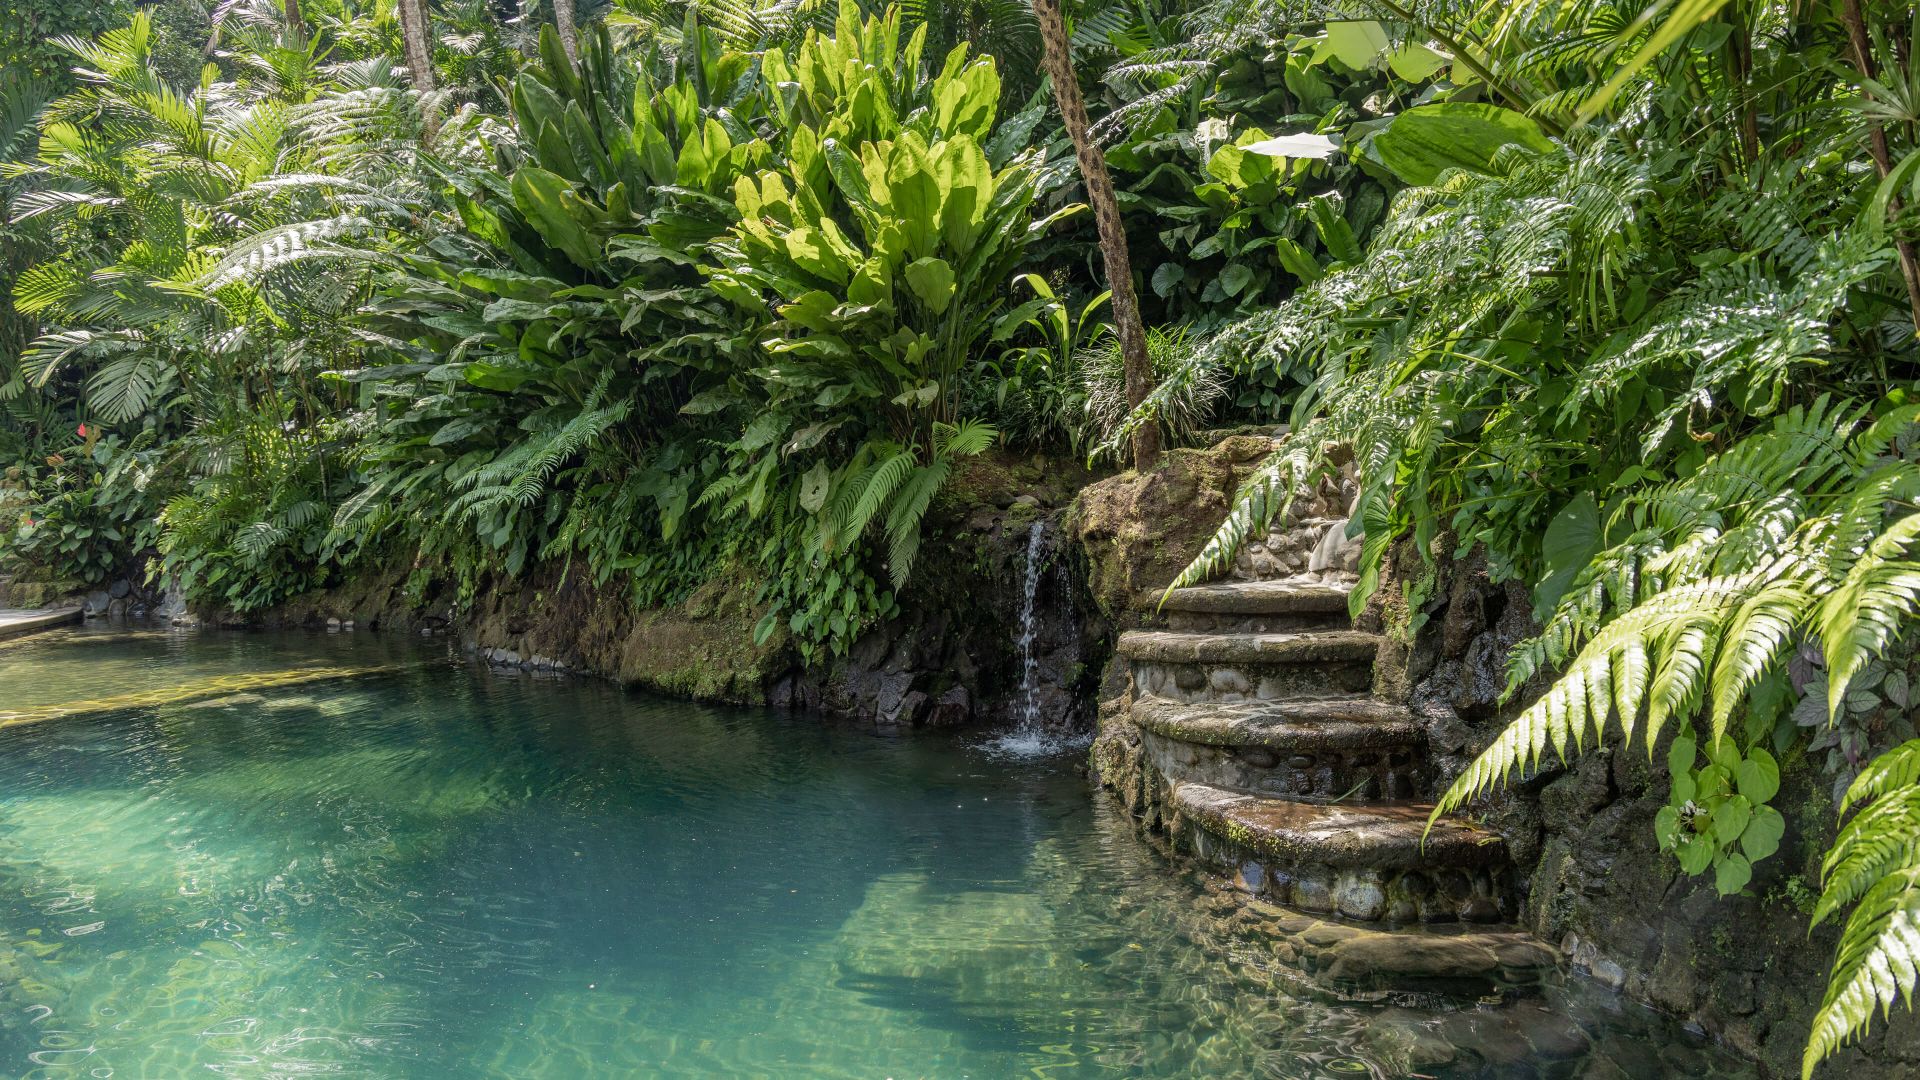 A Small Waterfall In A Tropical Area